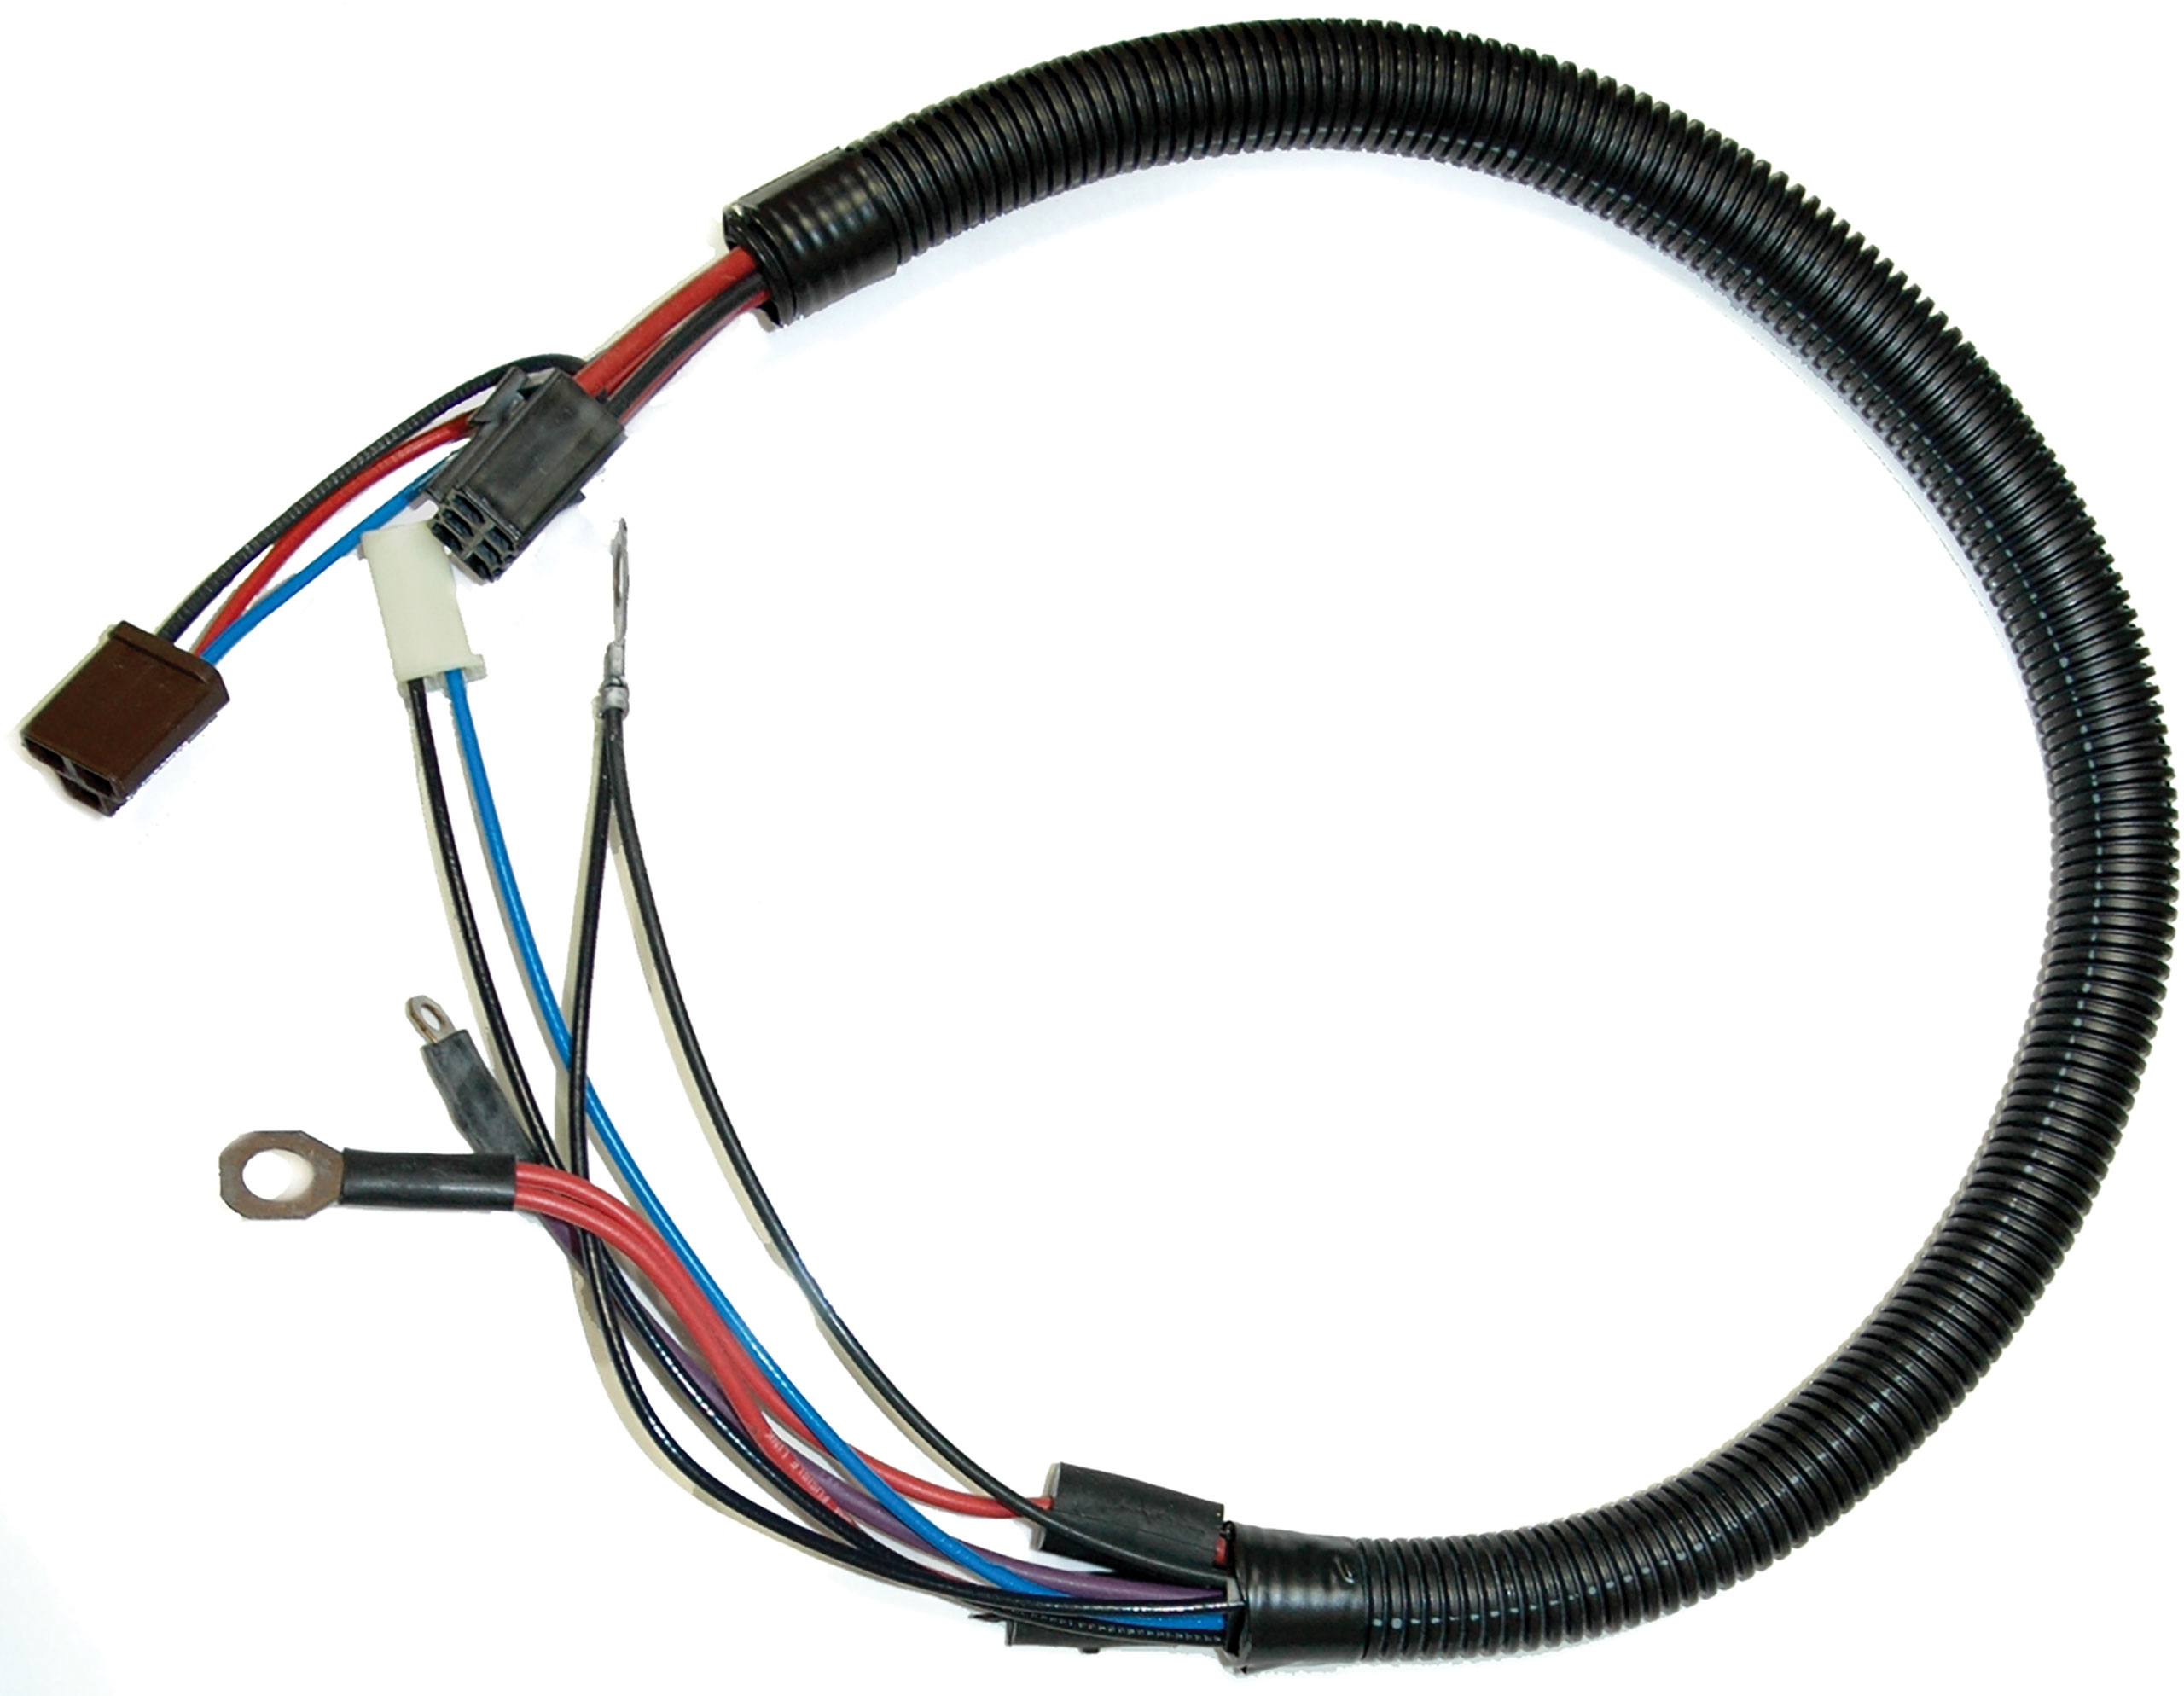 C3 1979 Chevrolet Corvette Harness. Starter Extension W/Air Conditioning L82 - Lectric Limited, Inc.